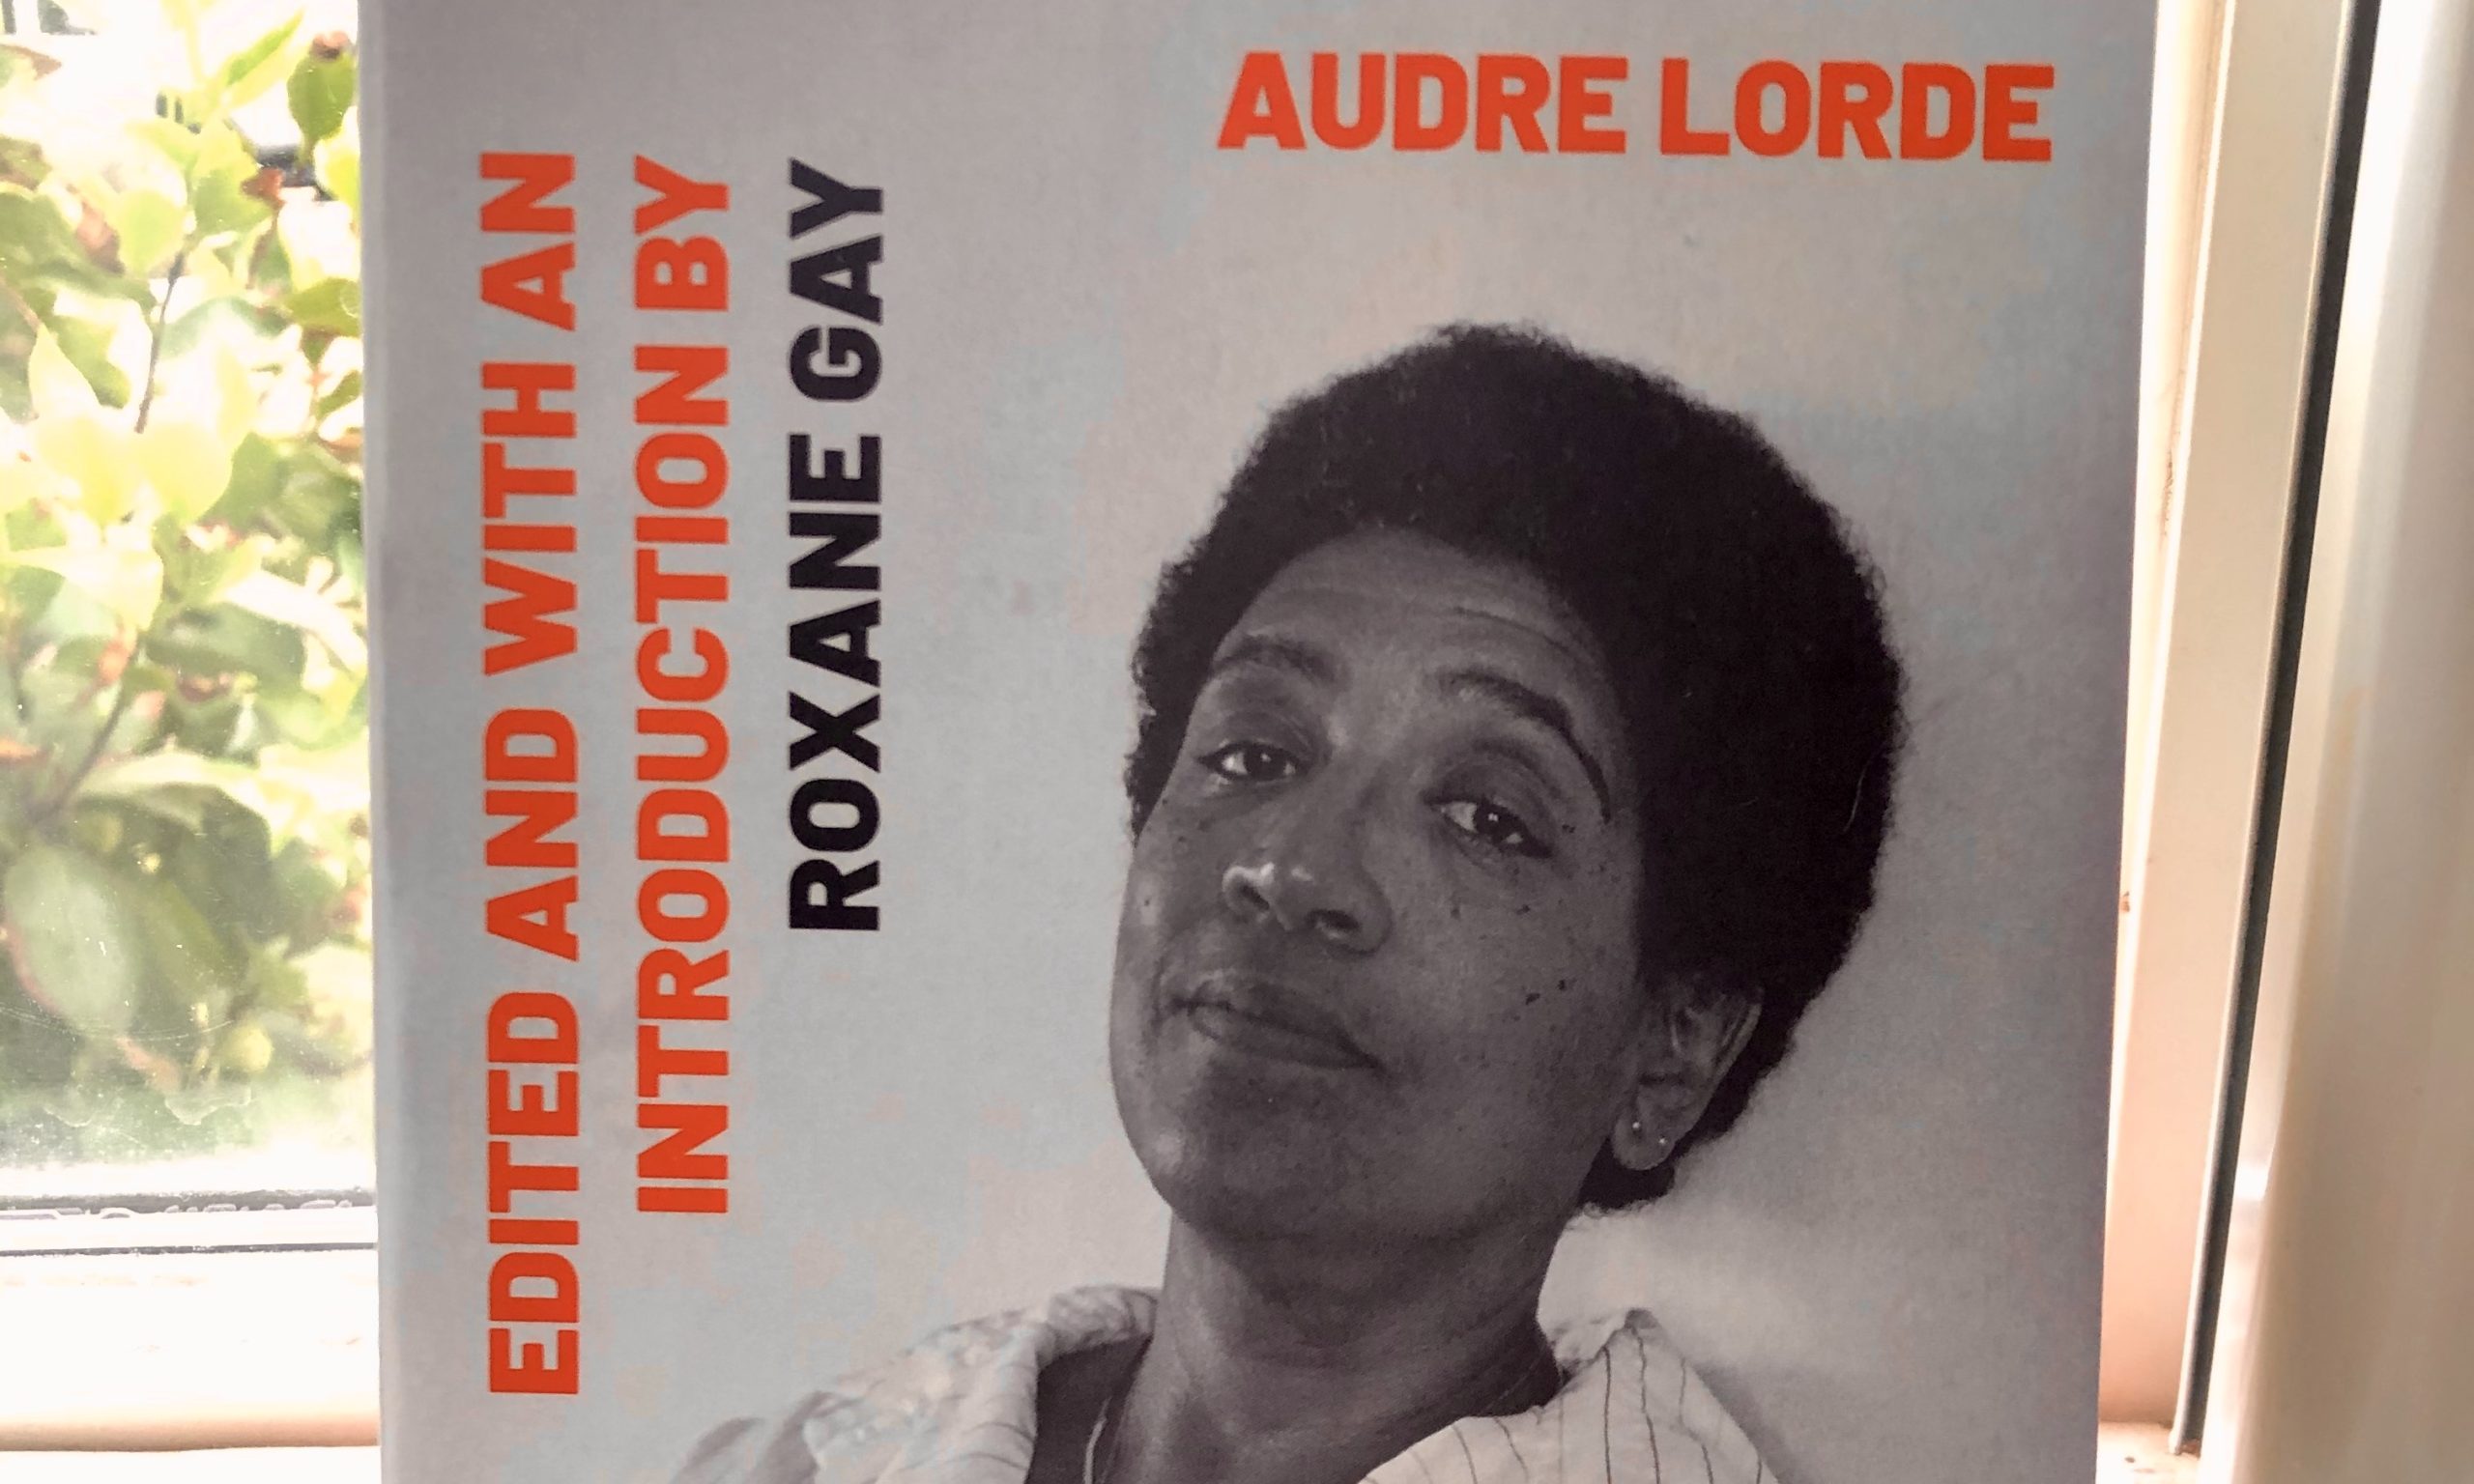 The Selected Works of Audre Lorde, edited by Roxane Gay